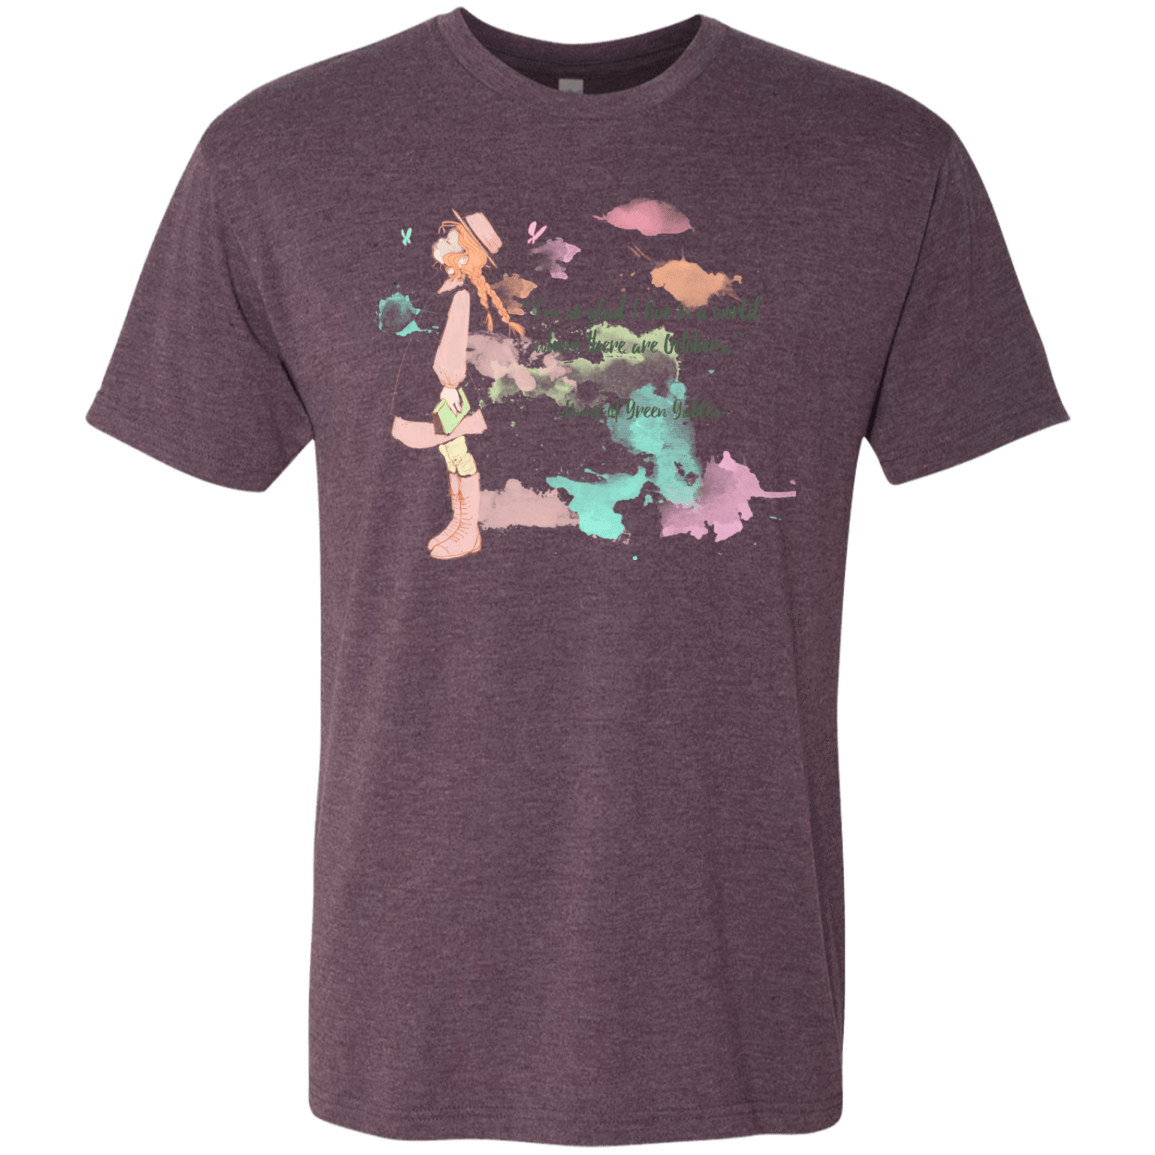 T-Shirts Vintage Purple / Small Anne of Green Gables 2 Men's Triblend T-Shirt